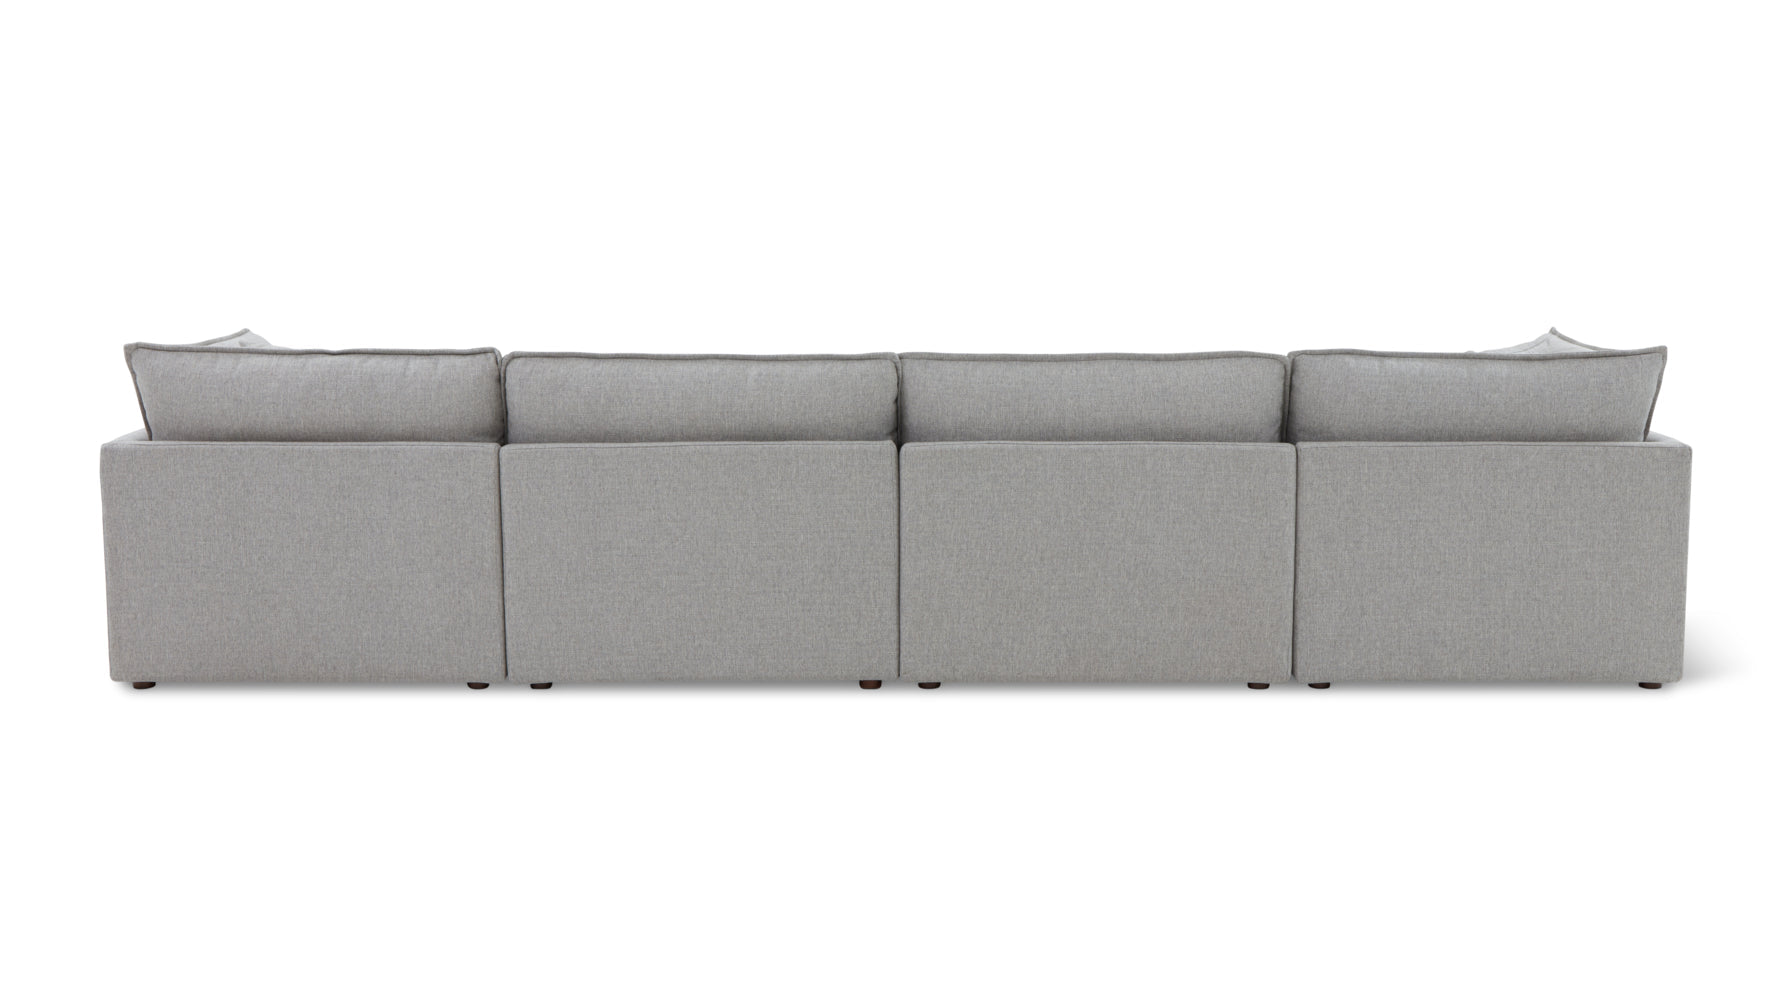 Chill Time 6-Piece Modular U-Shaped Sectional, Heather - Image 4